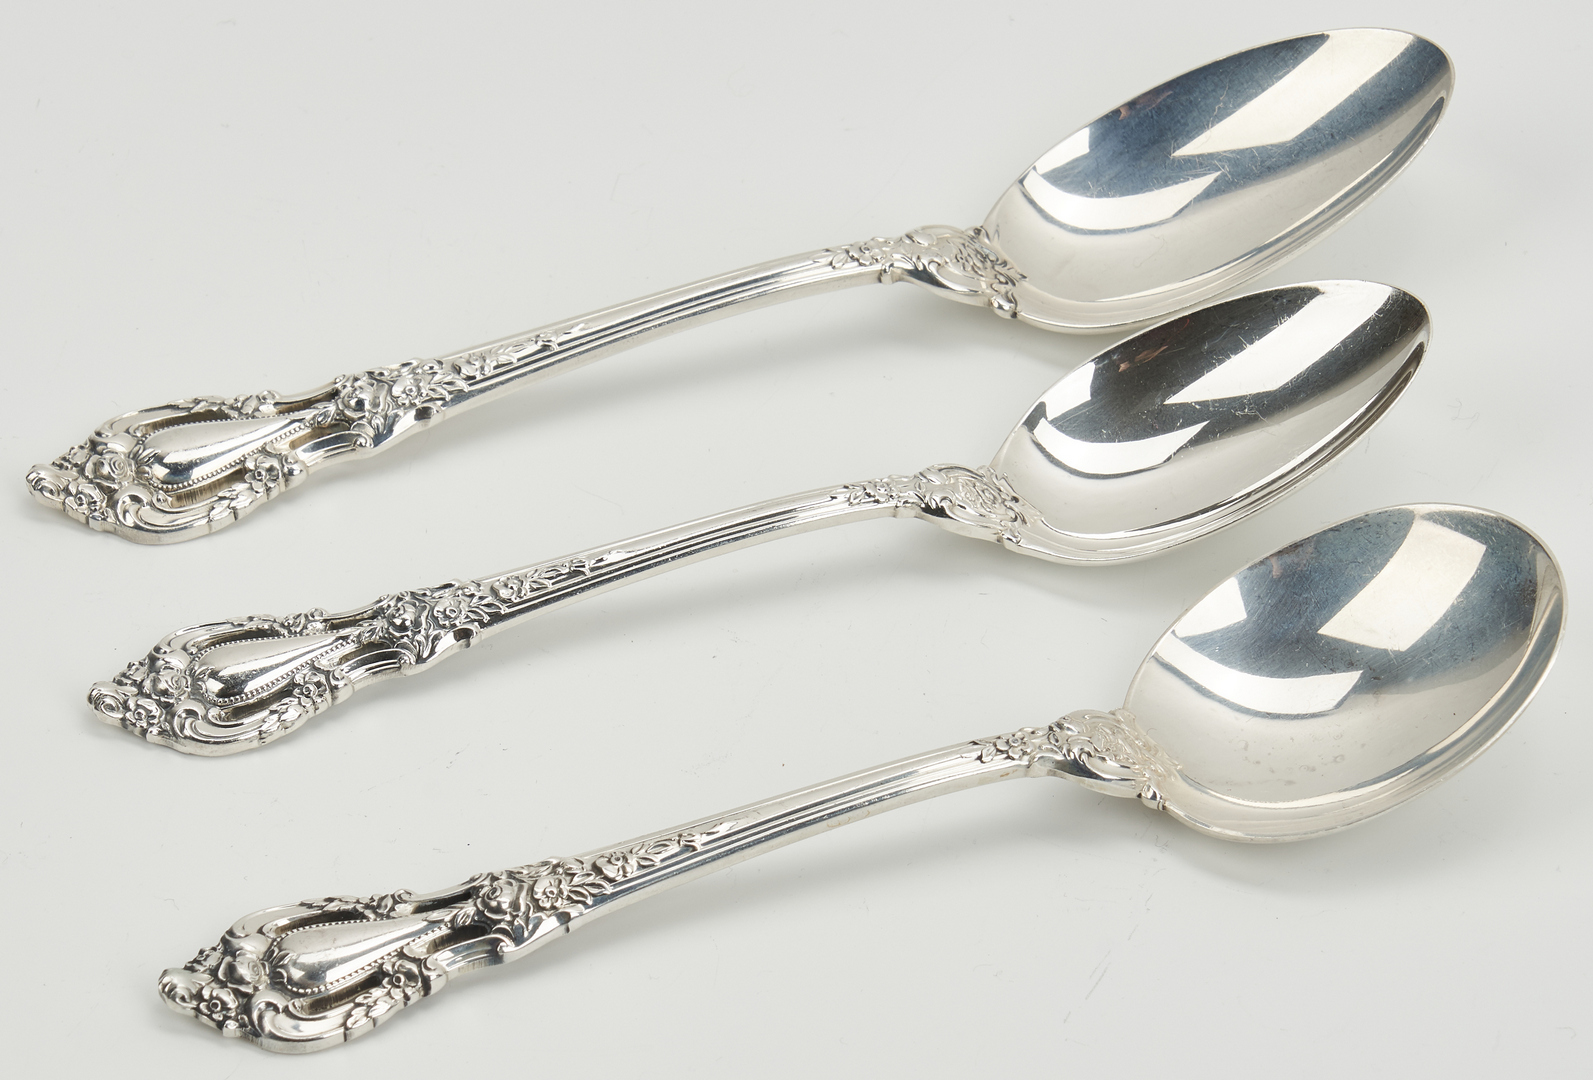 Lot 52: 157 Pcs. Lunt Eloquence Pattern Sterling Silver Flatware